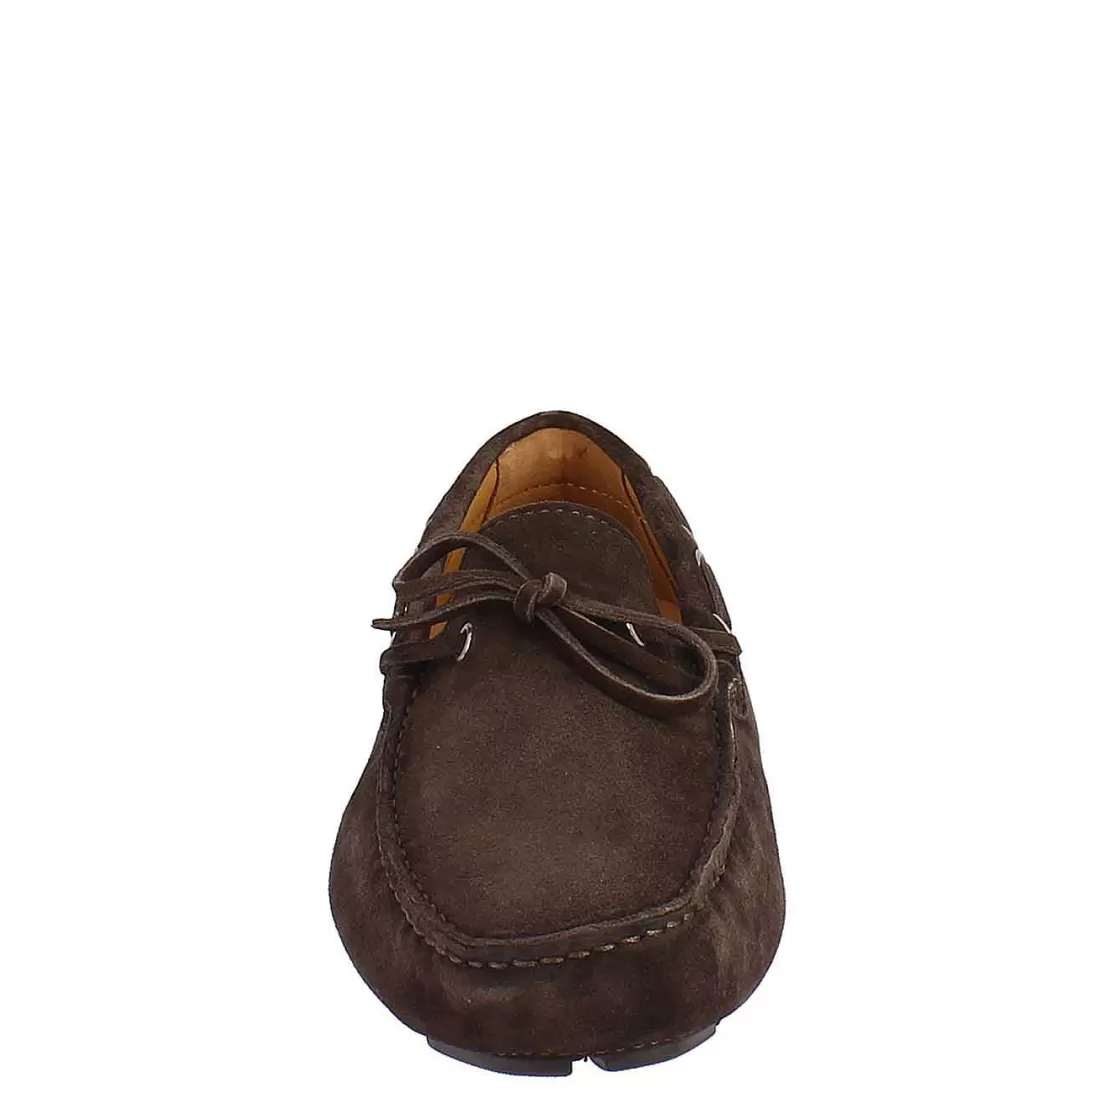 Leonardo Handmade Men'S Carshoe Loafers In Brown Suede Leather. Fashion